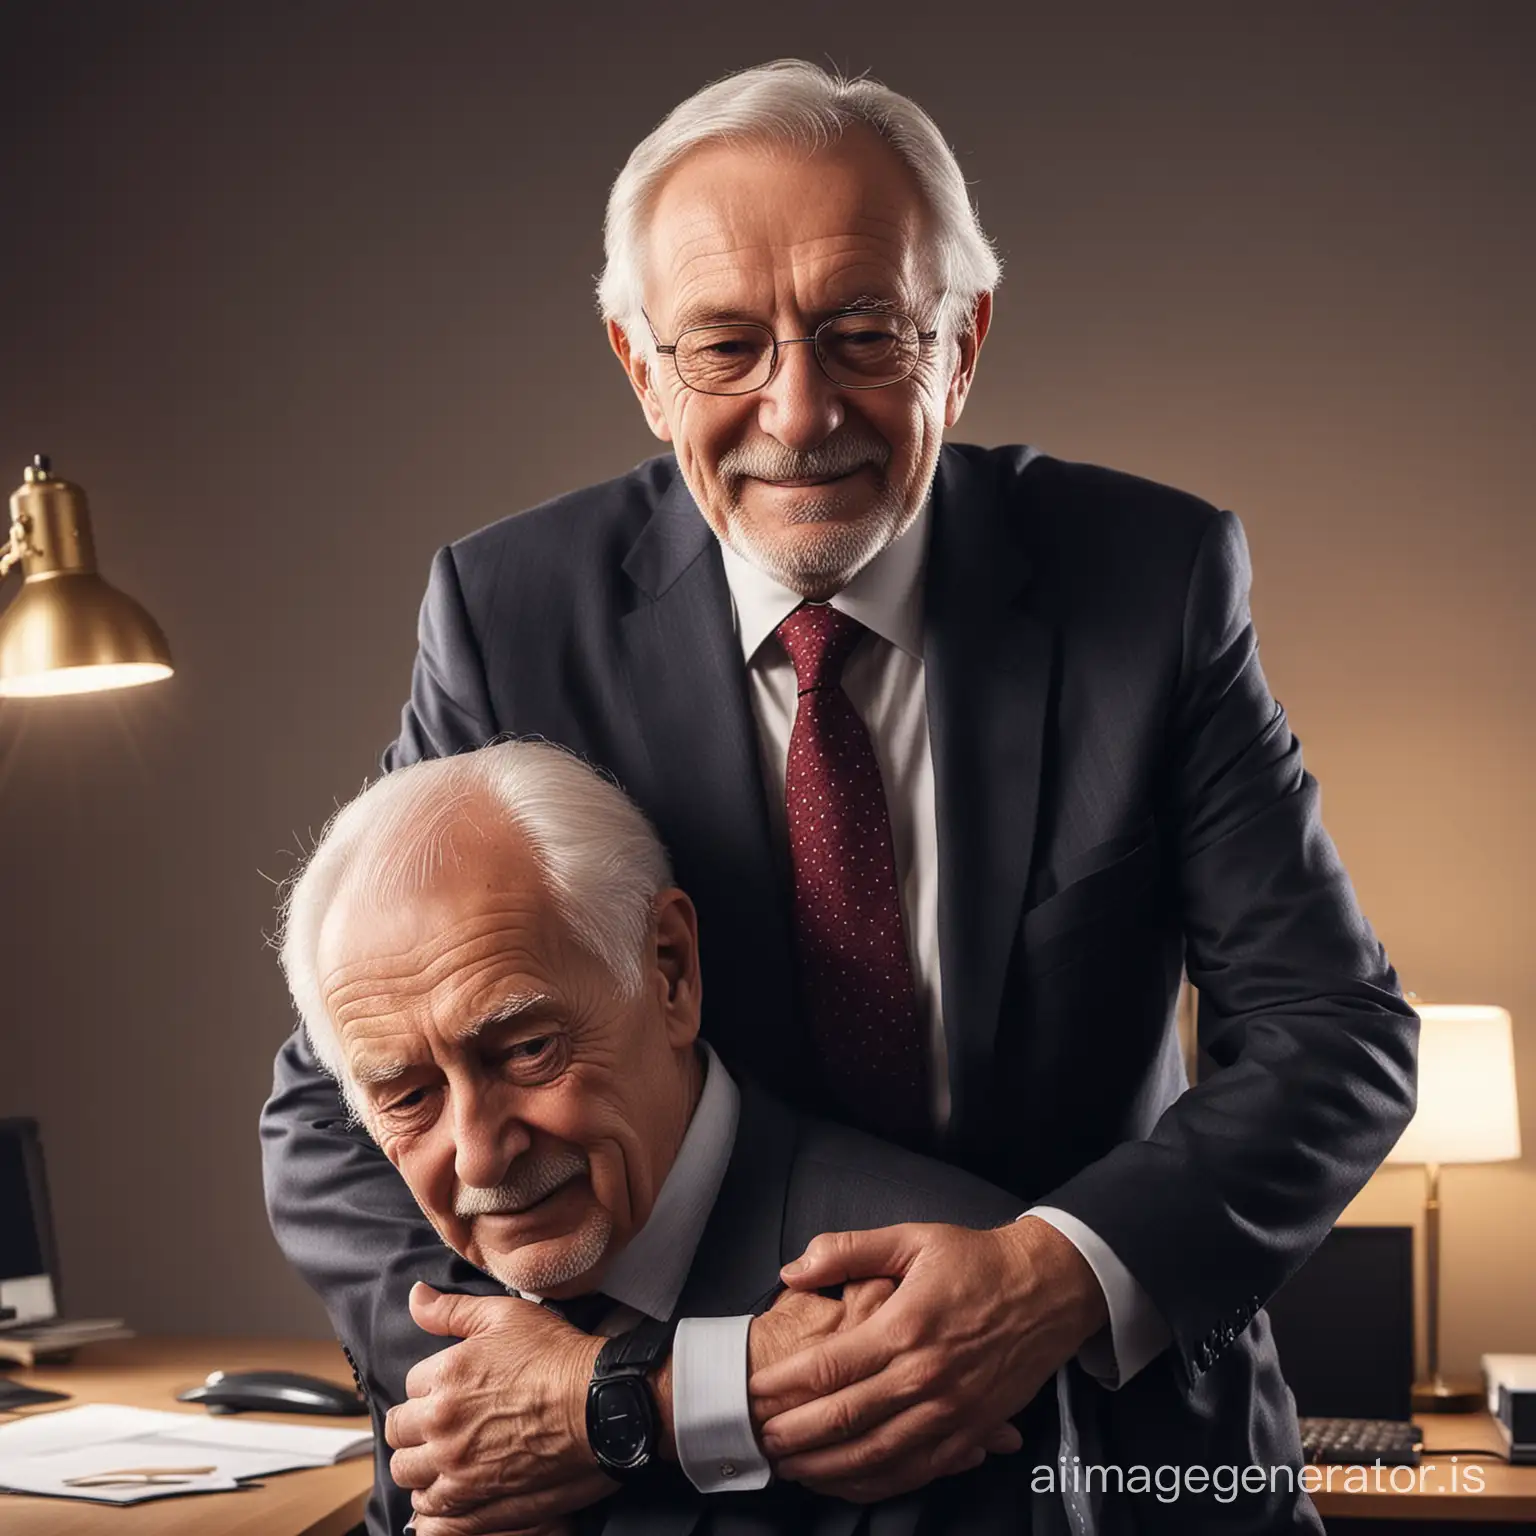 Senior-Business-Partners-Embracing-in-Dramatic-Office-Setting